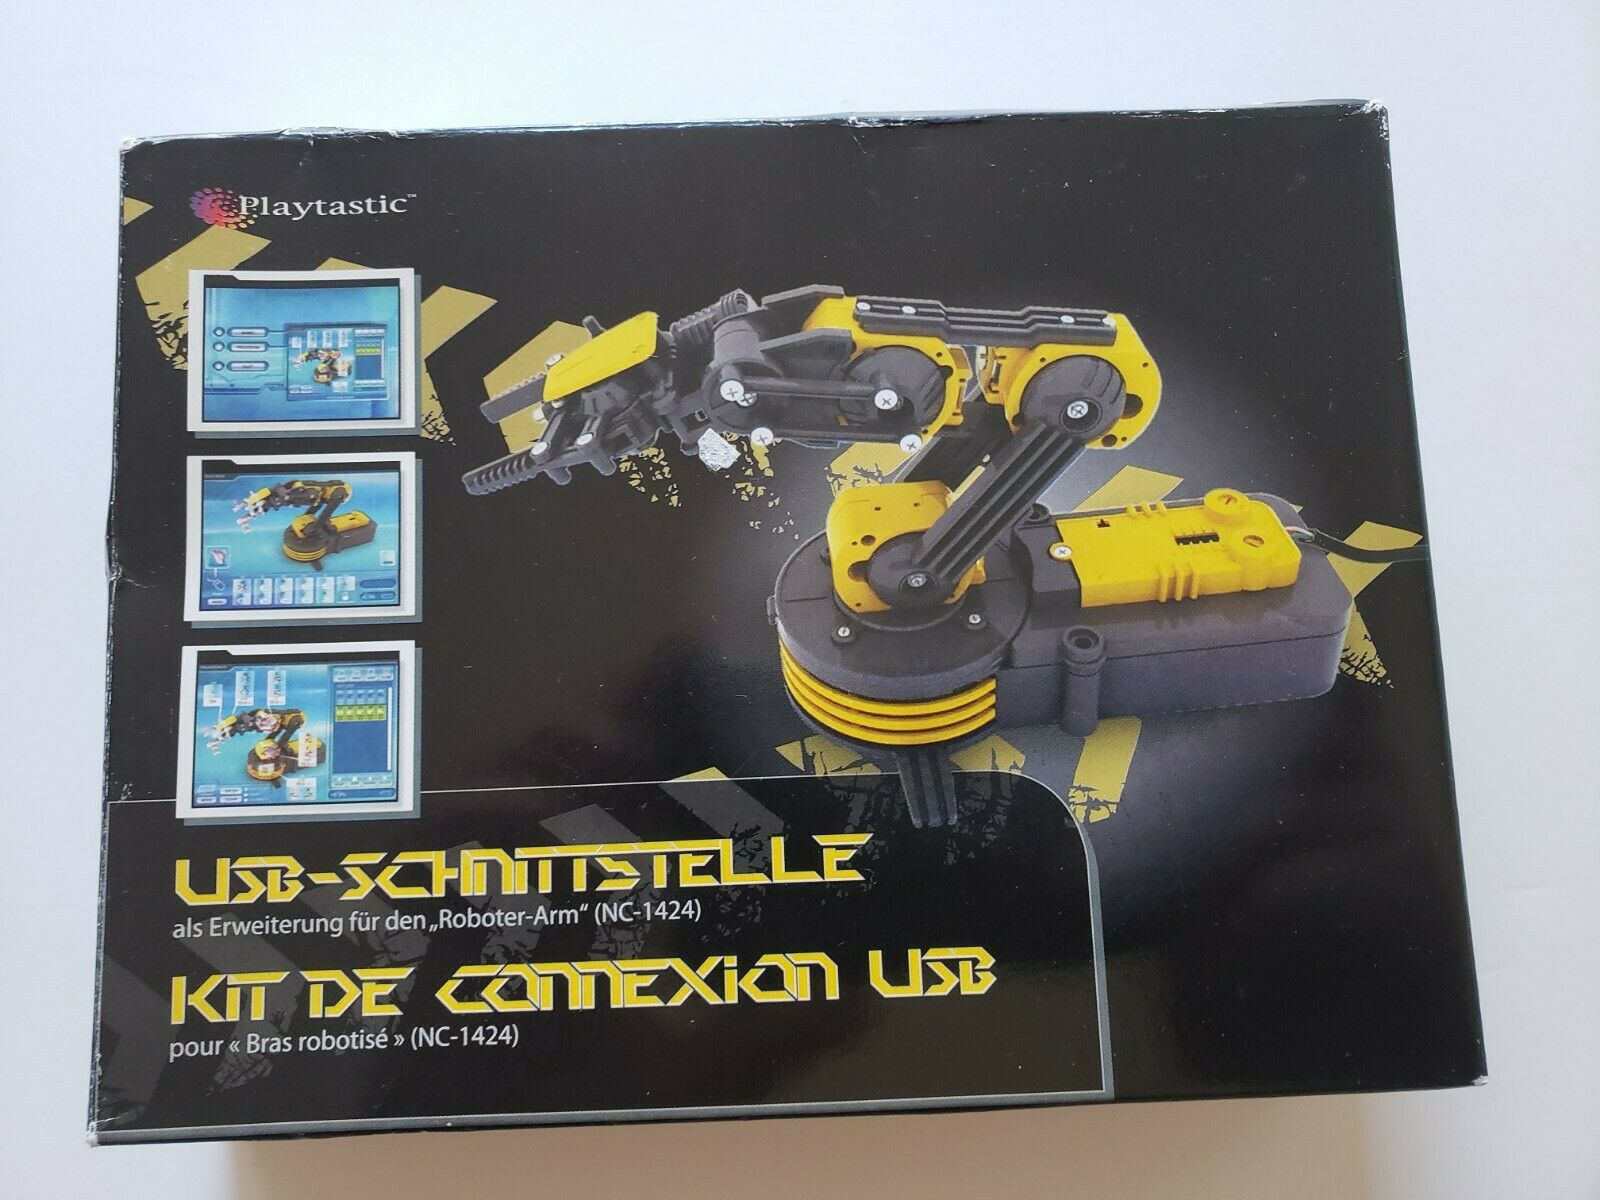 New Open Boxed Playtastic Usb-schnittstelle Usb Connection Kit Nc-1424